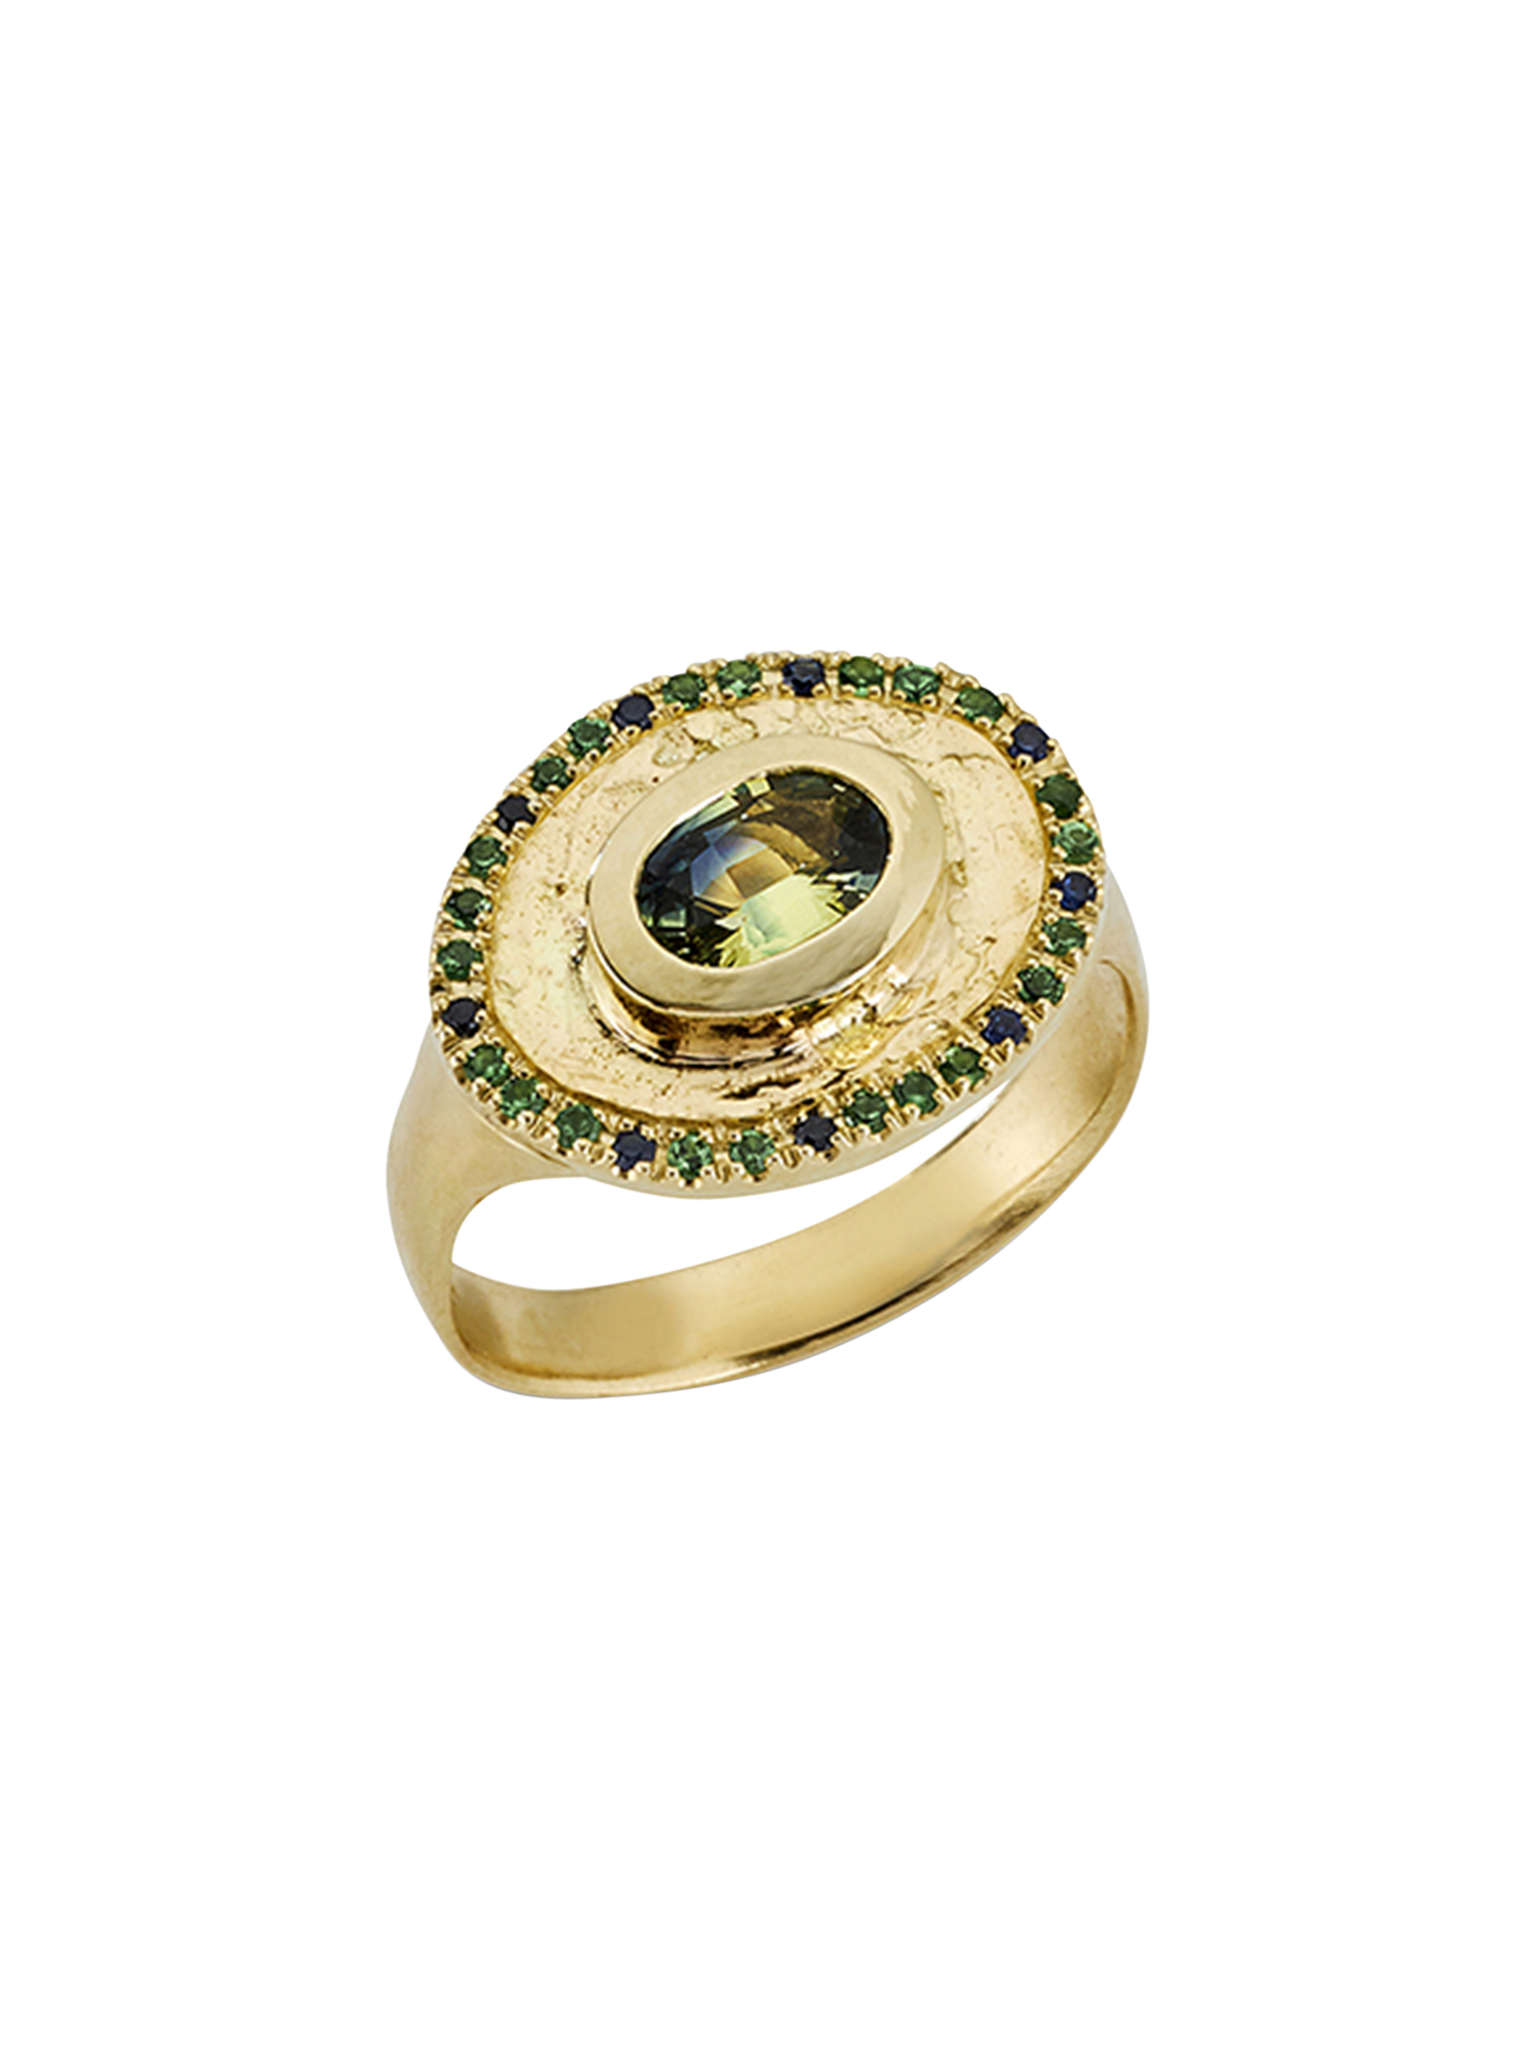 Theseus ring with parti sapphire - 18k solid gold